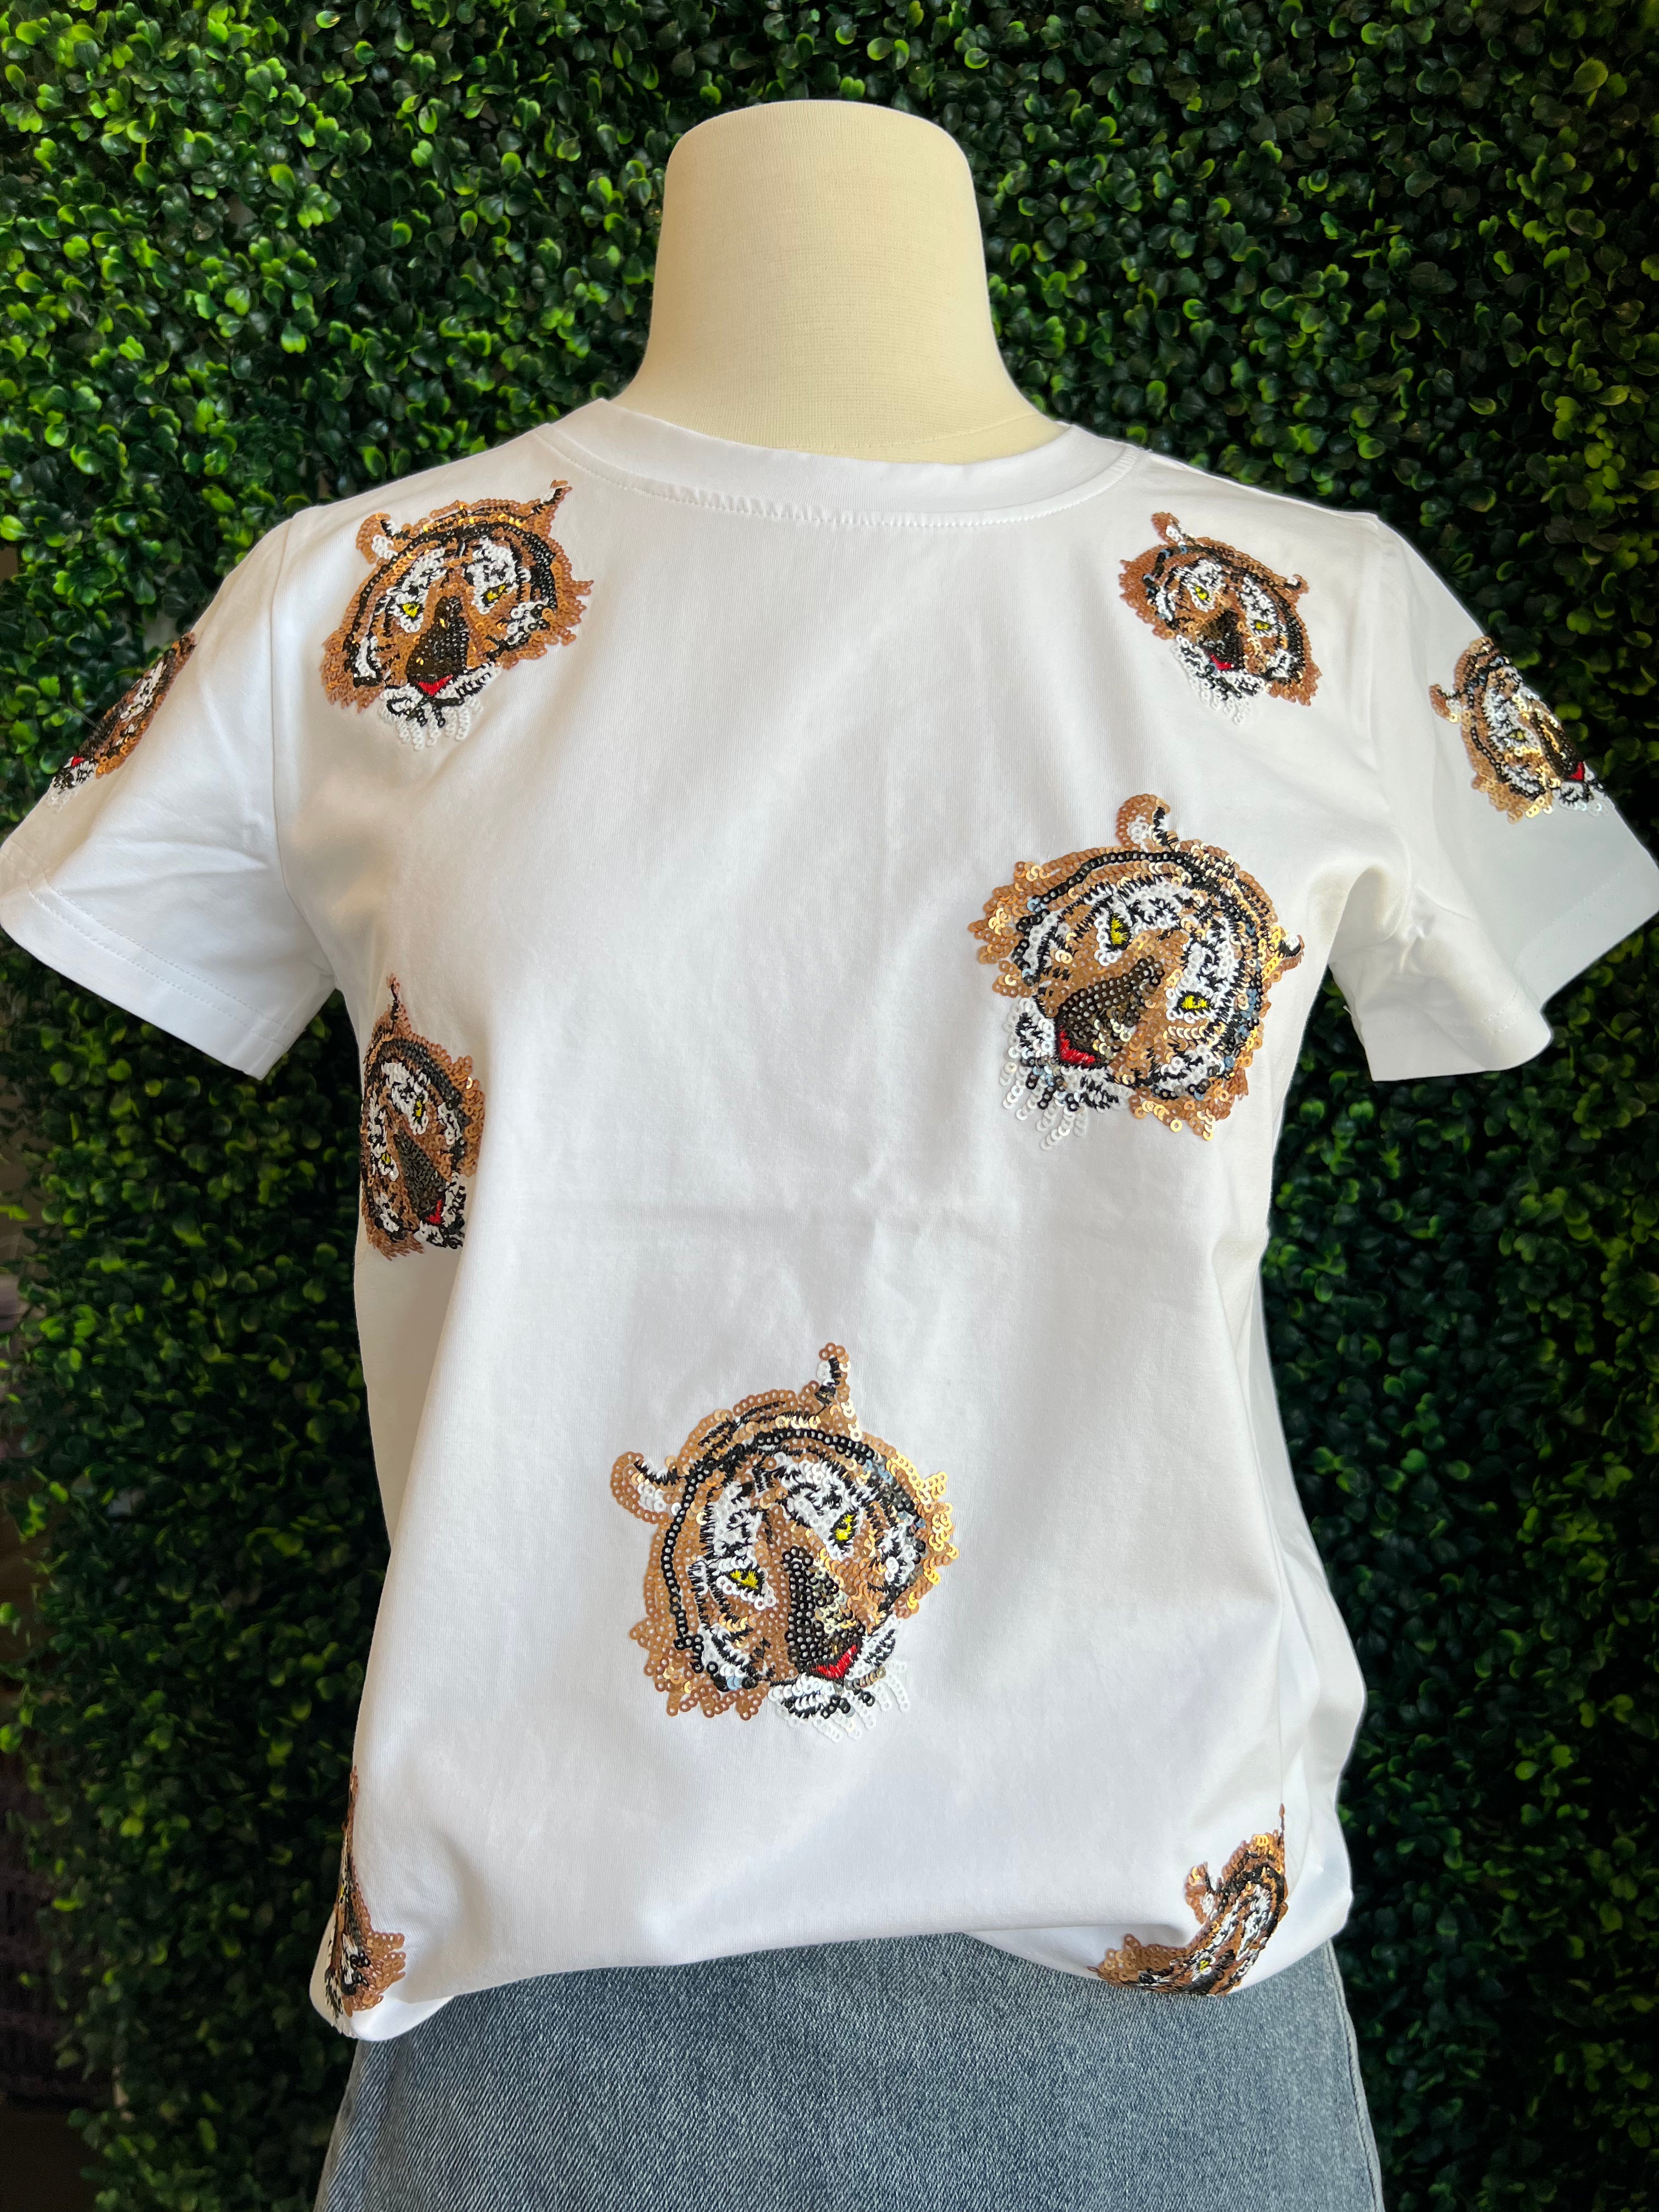 Tiger Takeover Tee